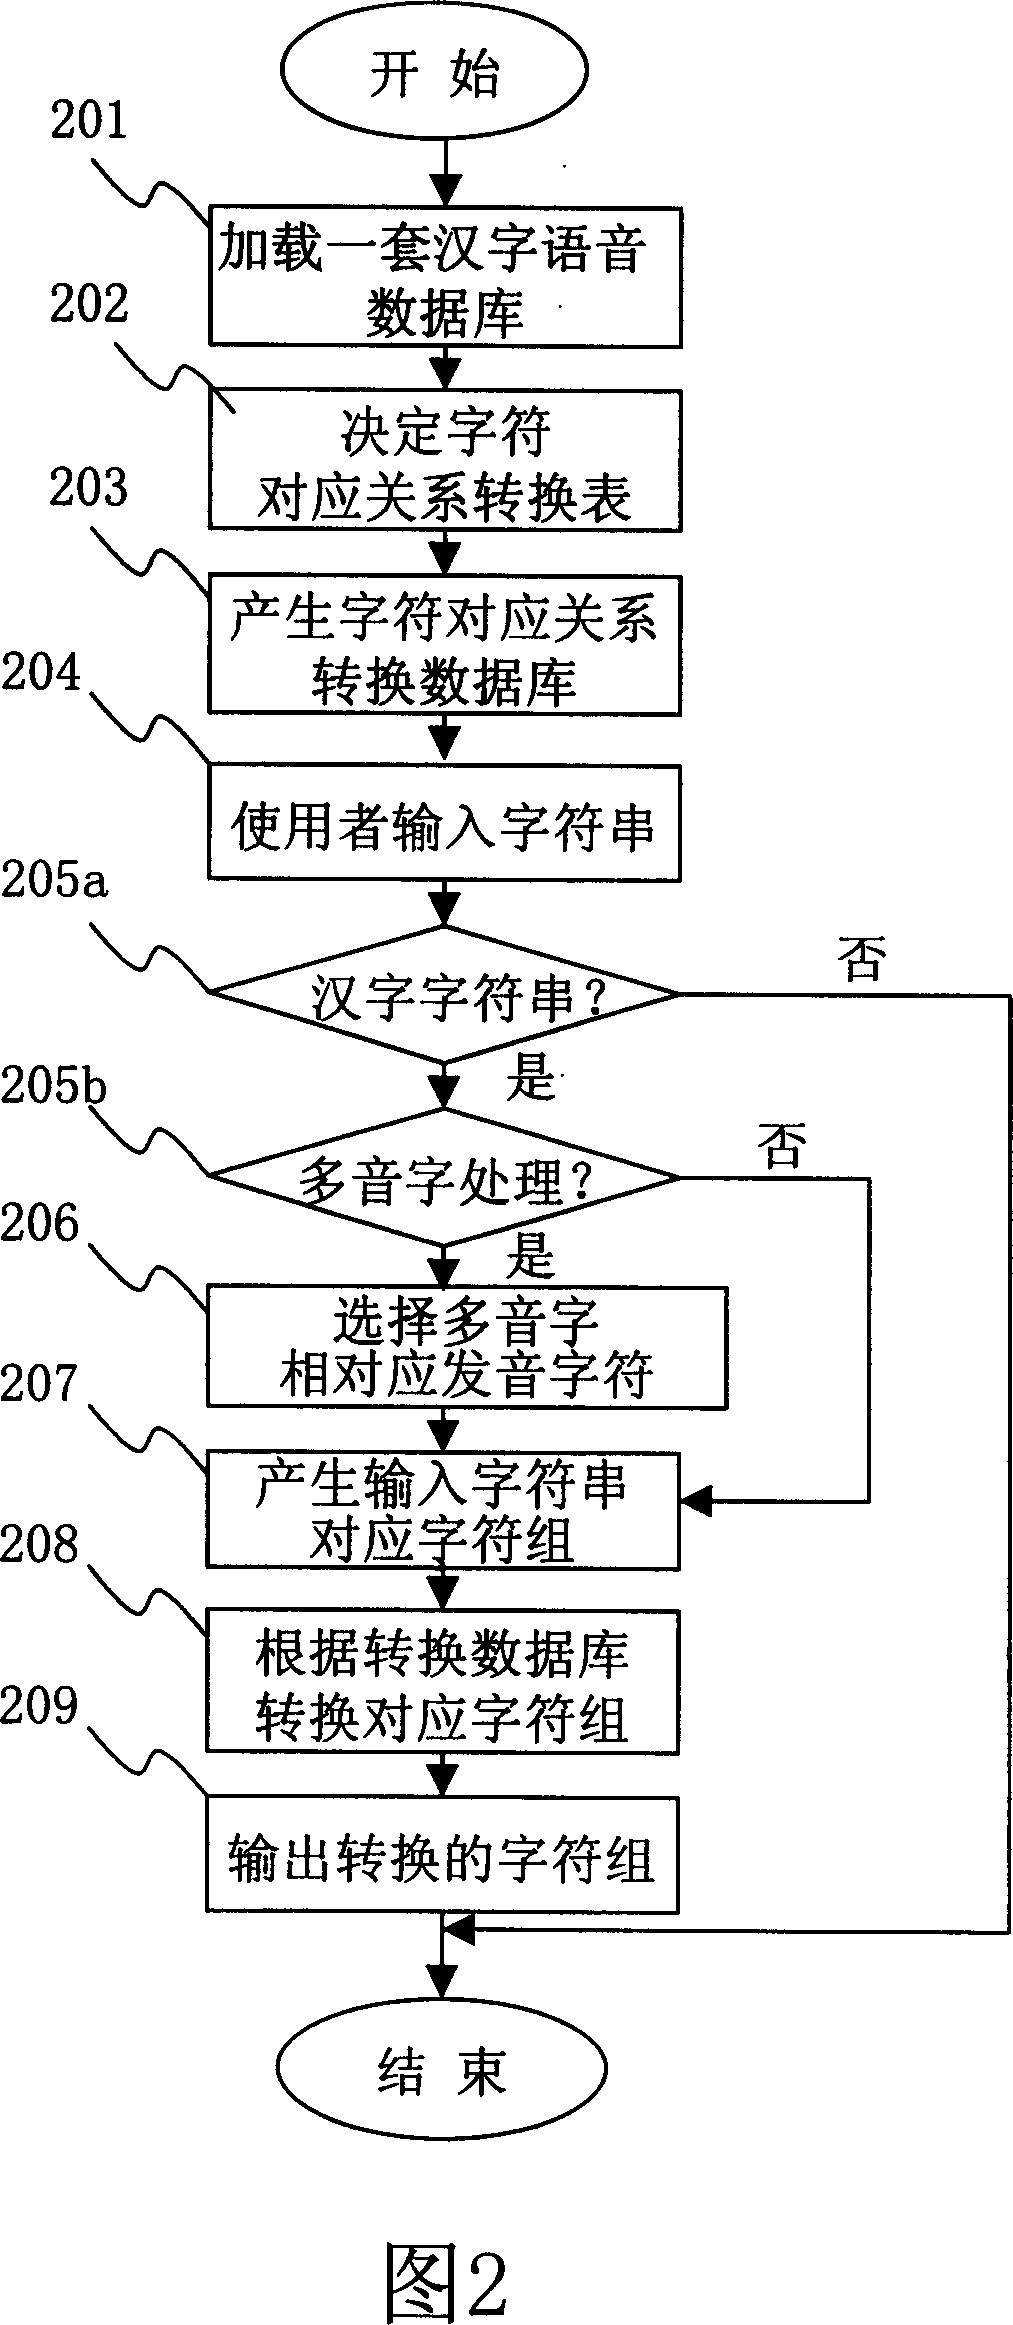 System and method capable of performing pinyin romanization-phonetic notation conversion of multiple-syllable word